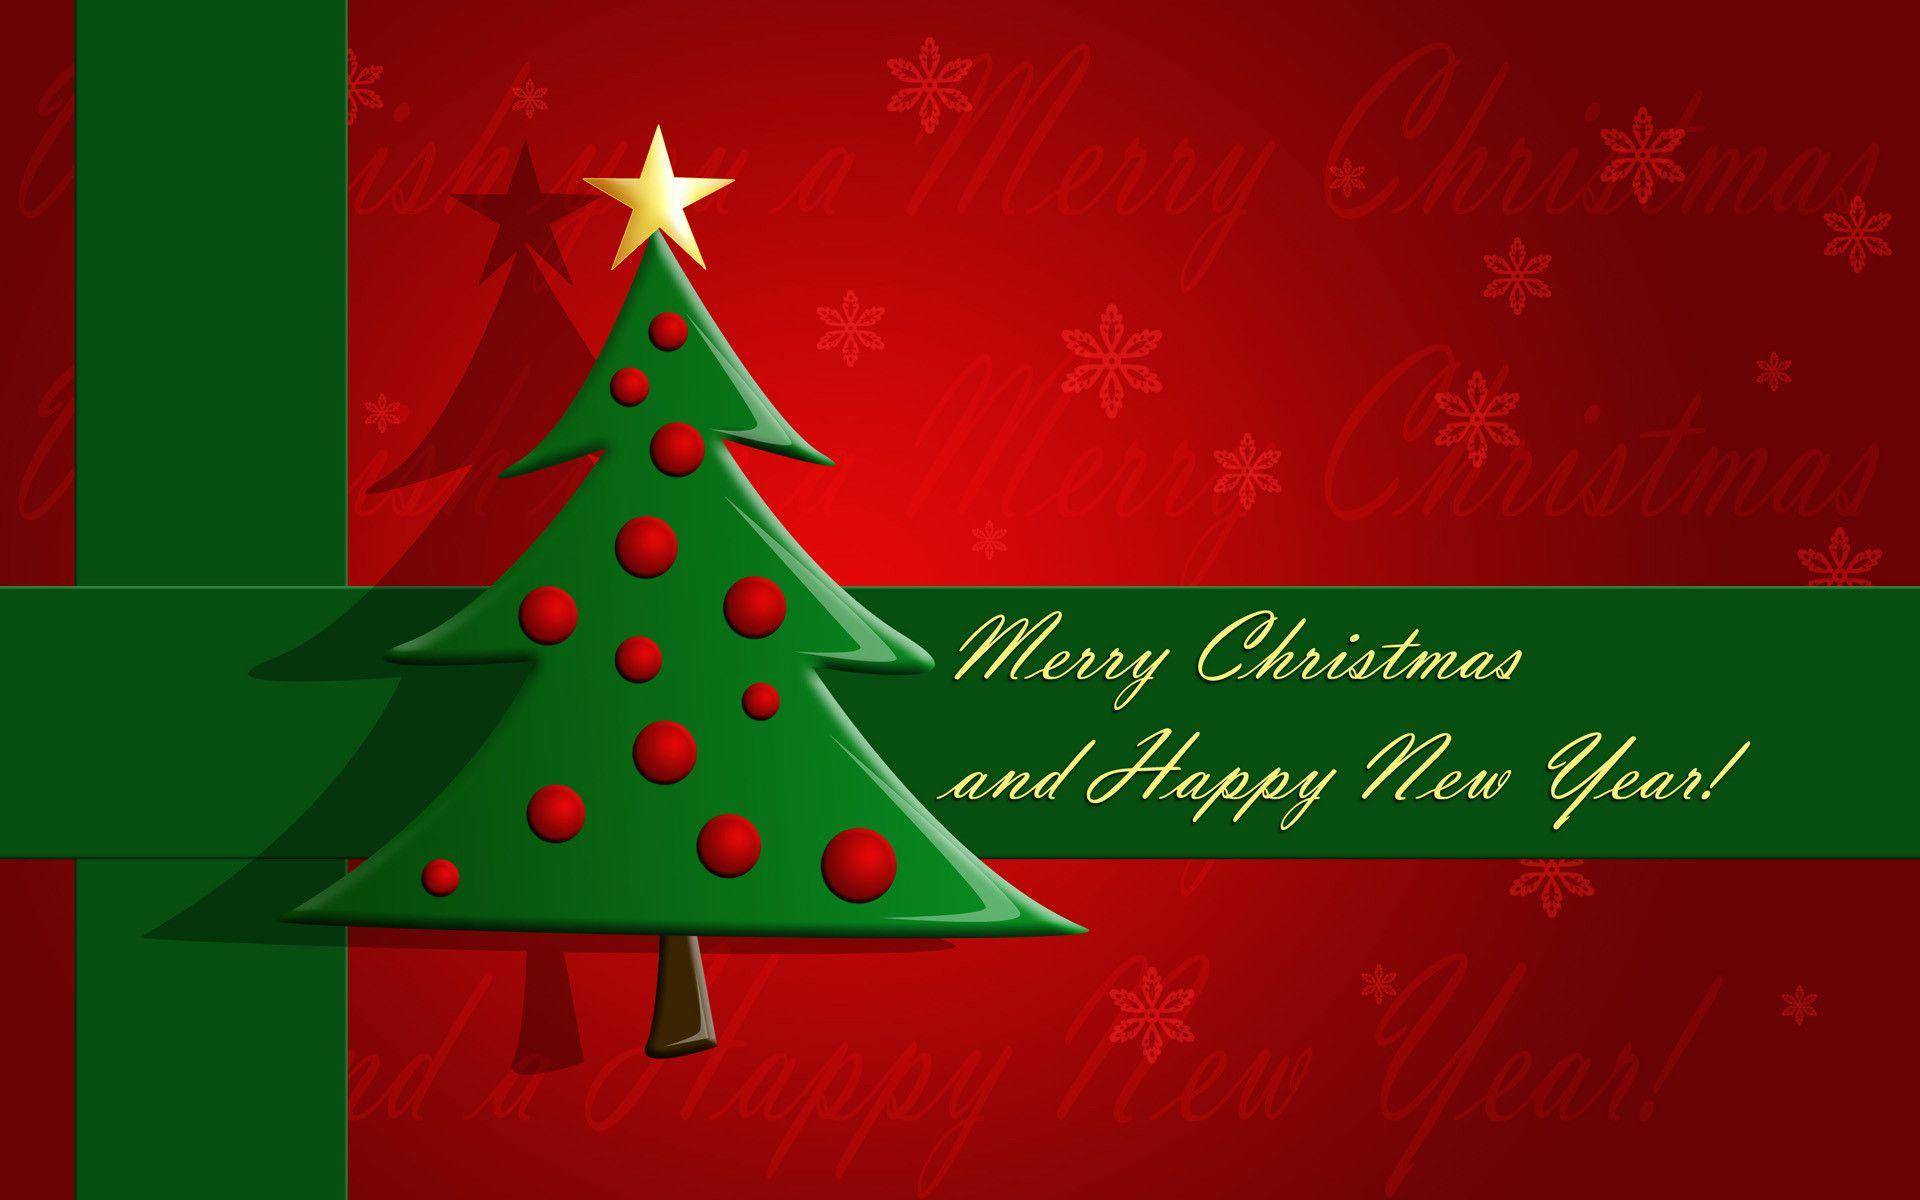 merry christmas and happy new year HD wallpaper HD background wallpaper free a. Happy merry christmas, Merry christmas image, Happy new year wallpaper